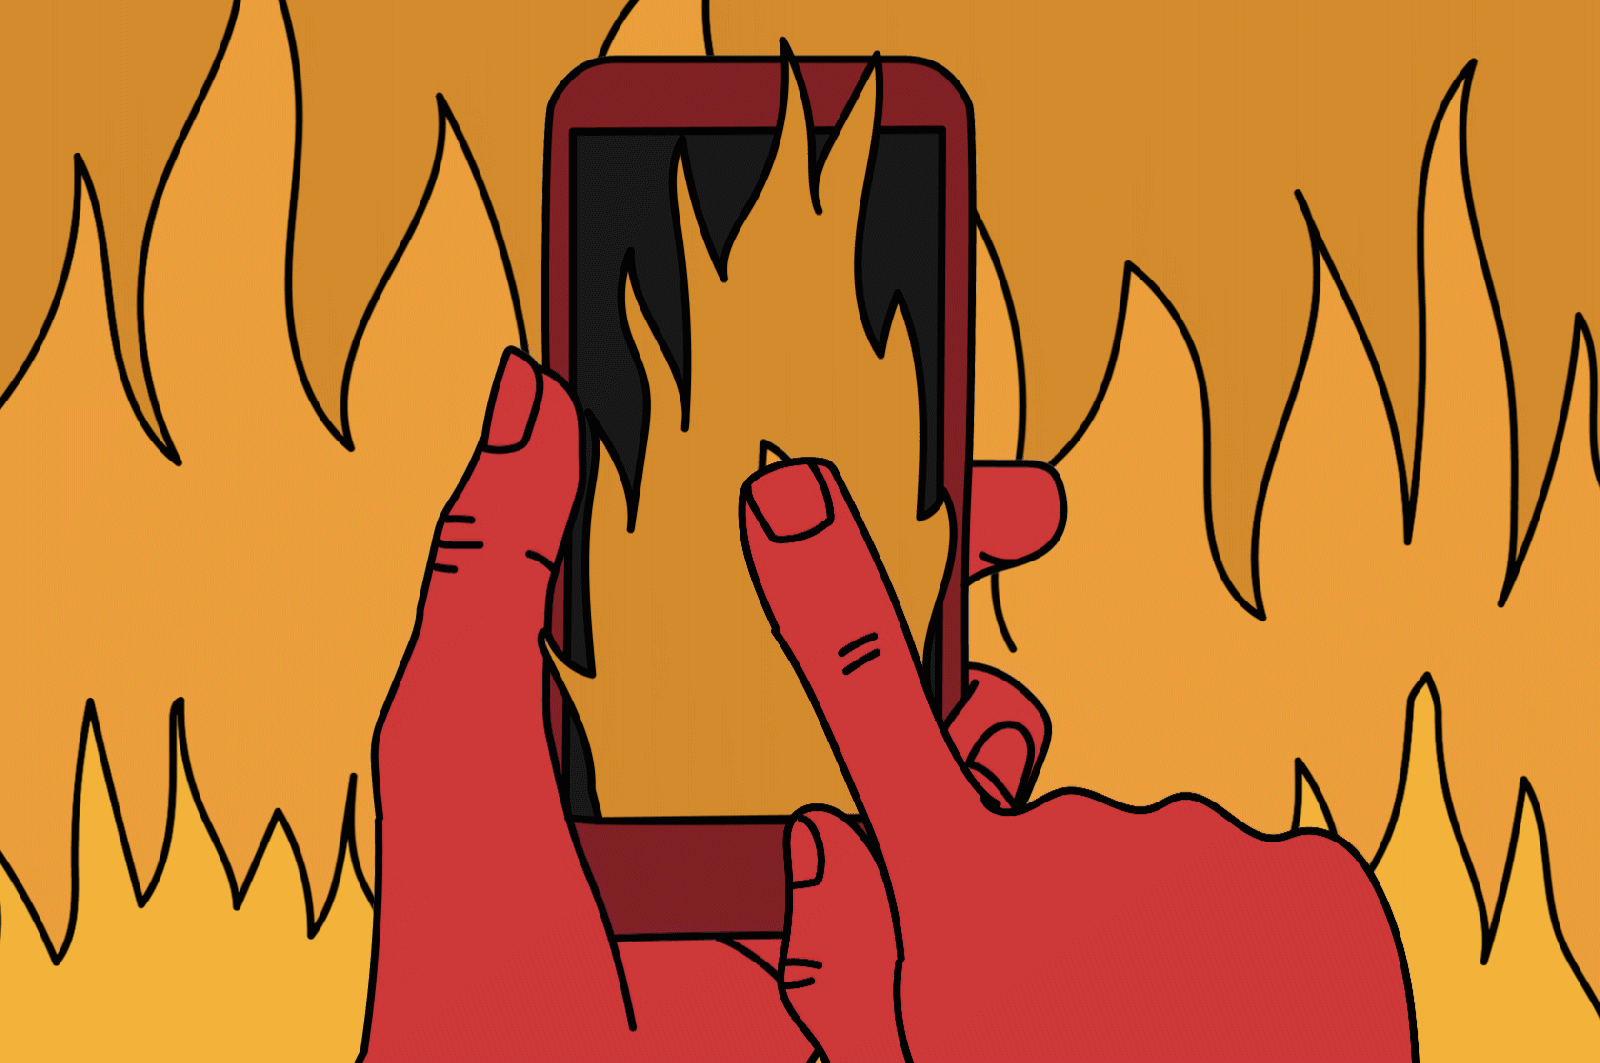 Finger scrolling through fire on a phone